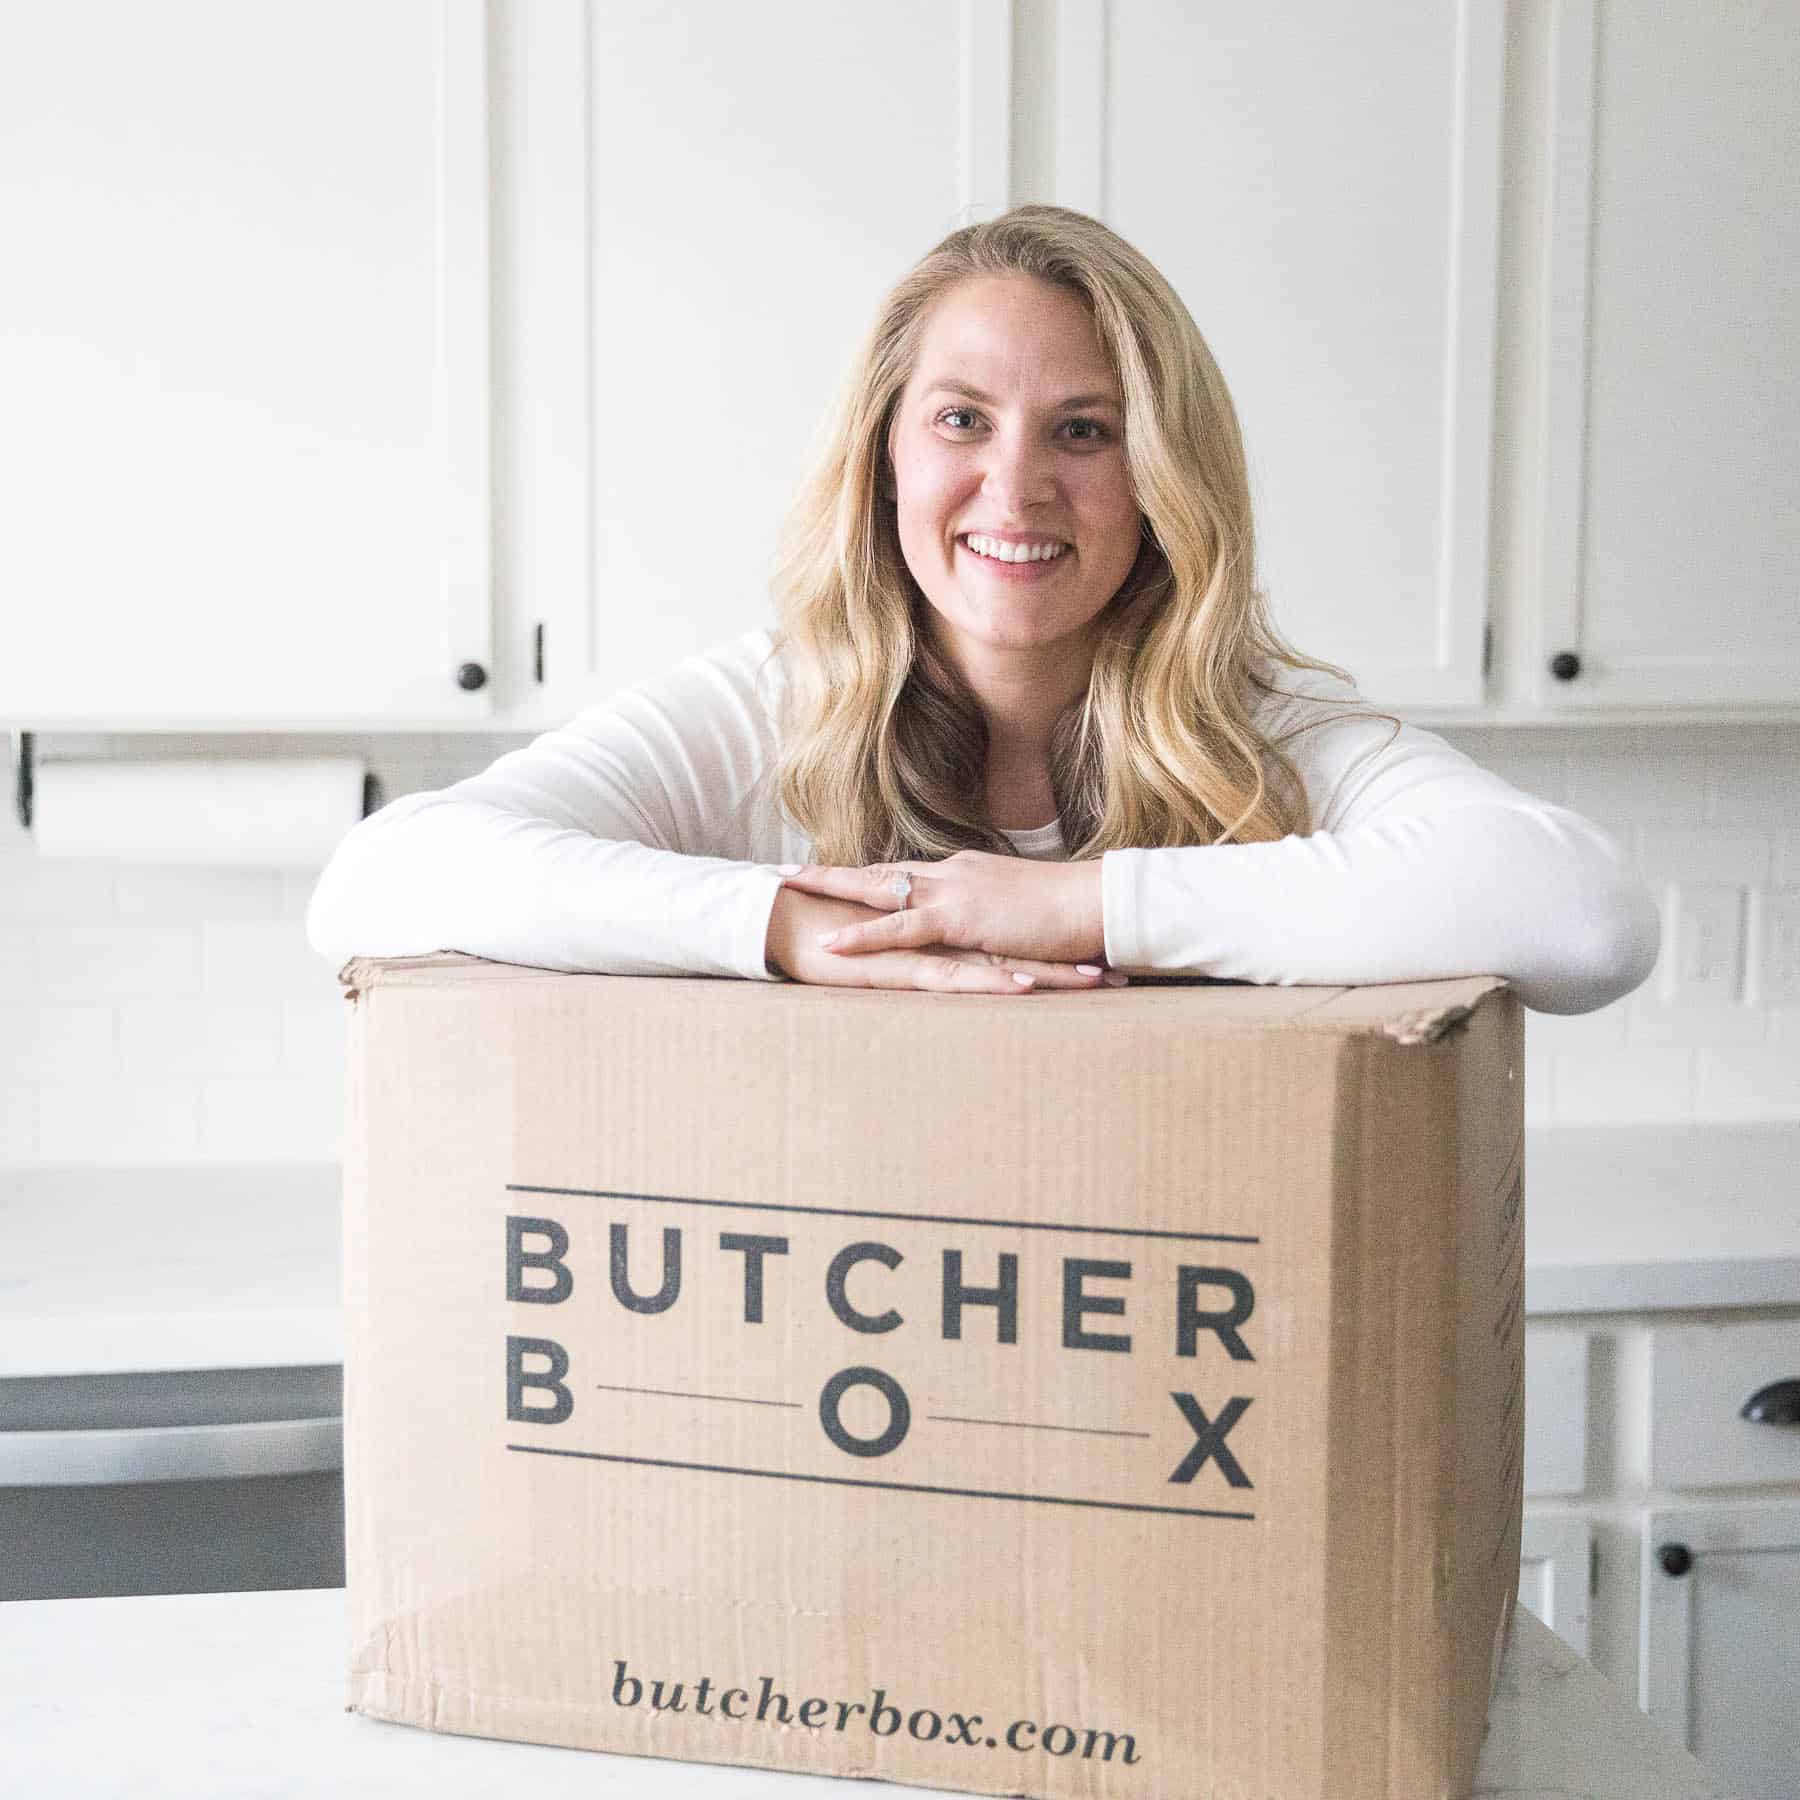 ButcherBox Review: Is it worth it? - The Real Food Dietitians